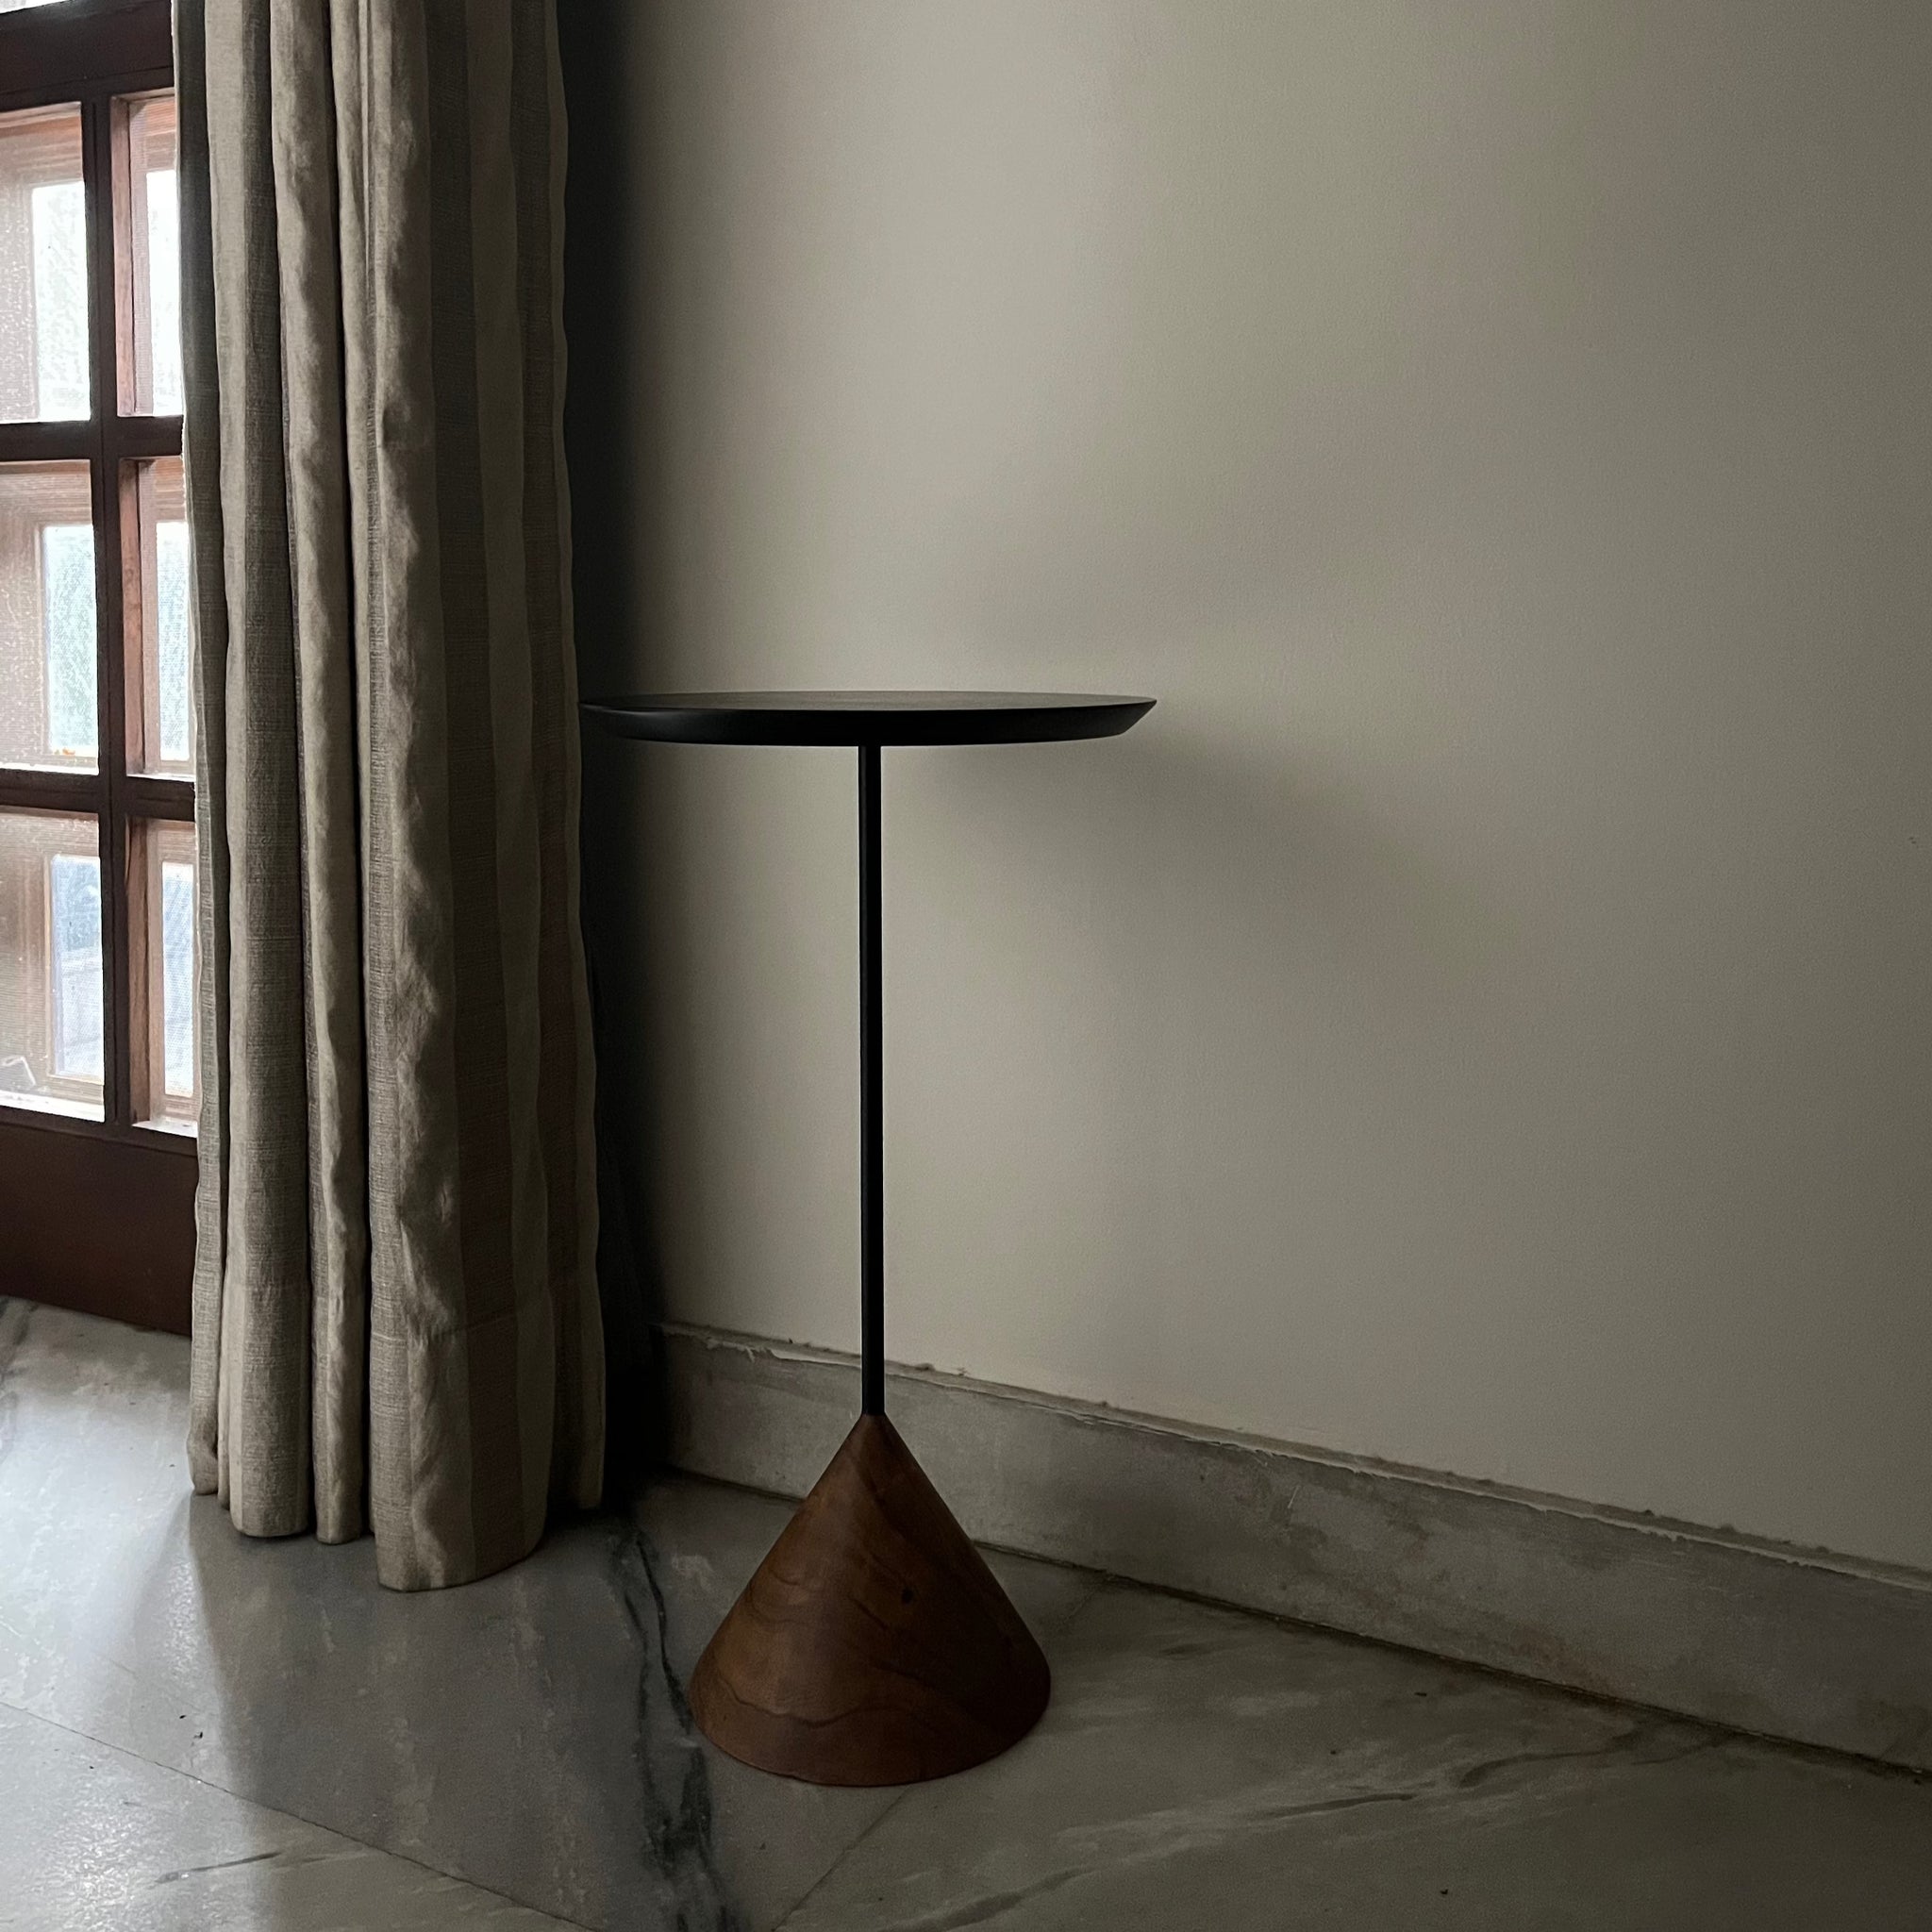 Cone End Table